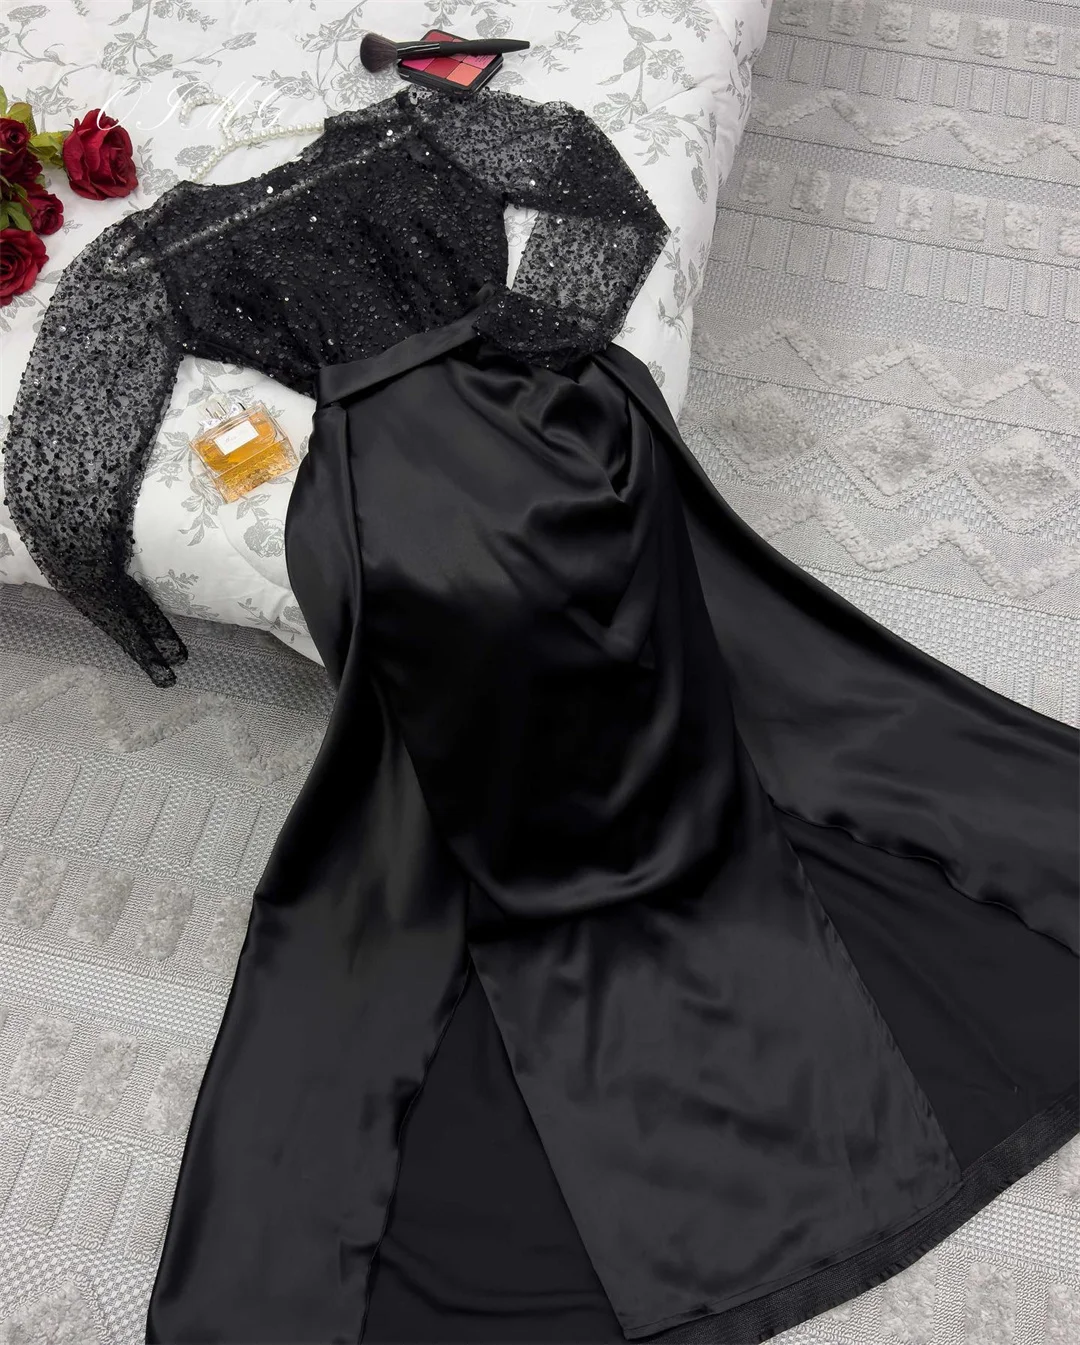 OIMG O-Neck Black Sequined Prom Dresses Mermaid Women Satin Long Sleeves Vintage Elegant Evening Gowns Formal Party Dress